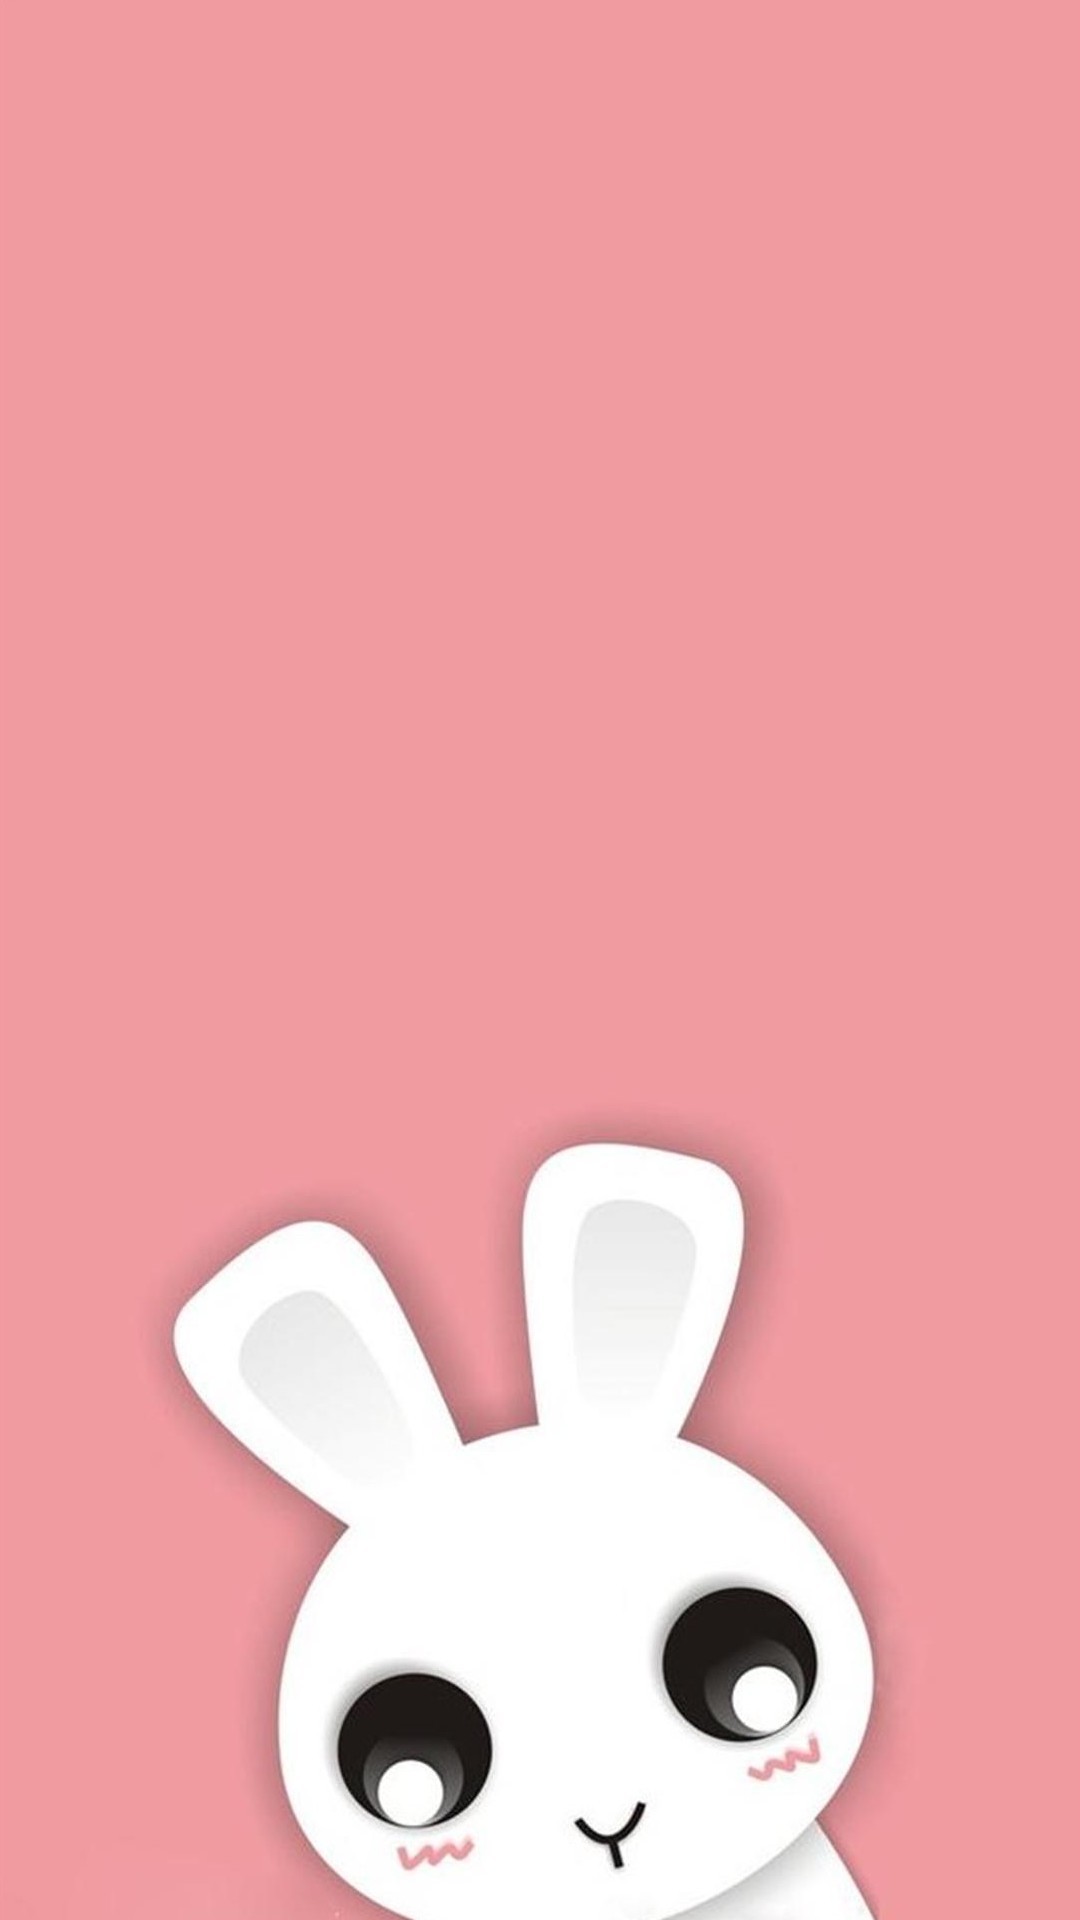 1080x1920 Cute wallpaper for iphone.